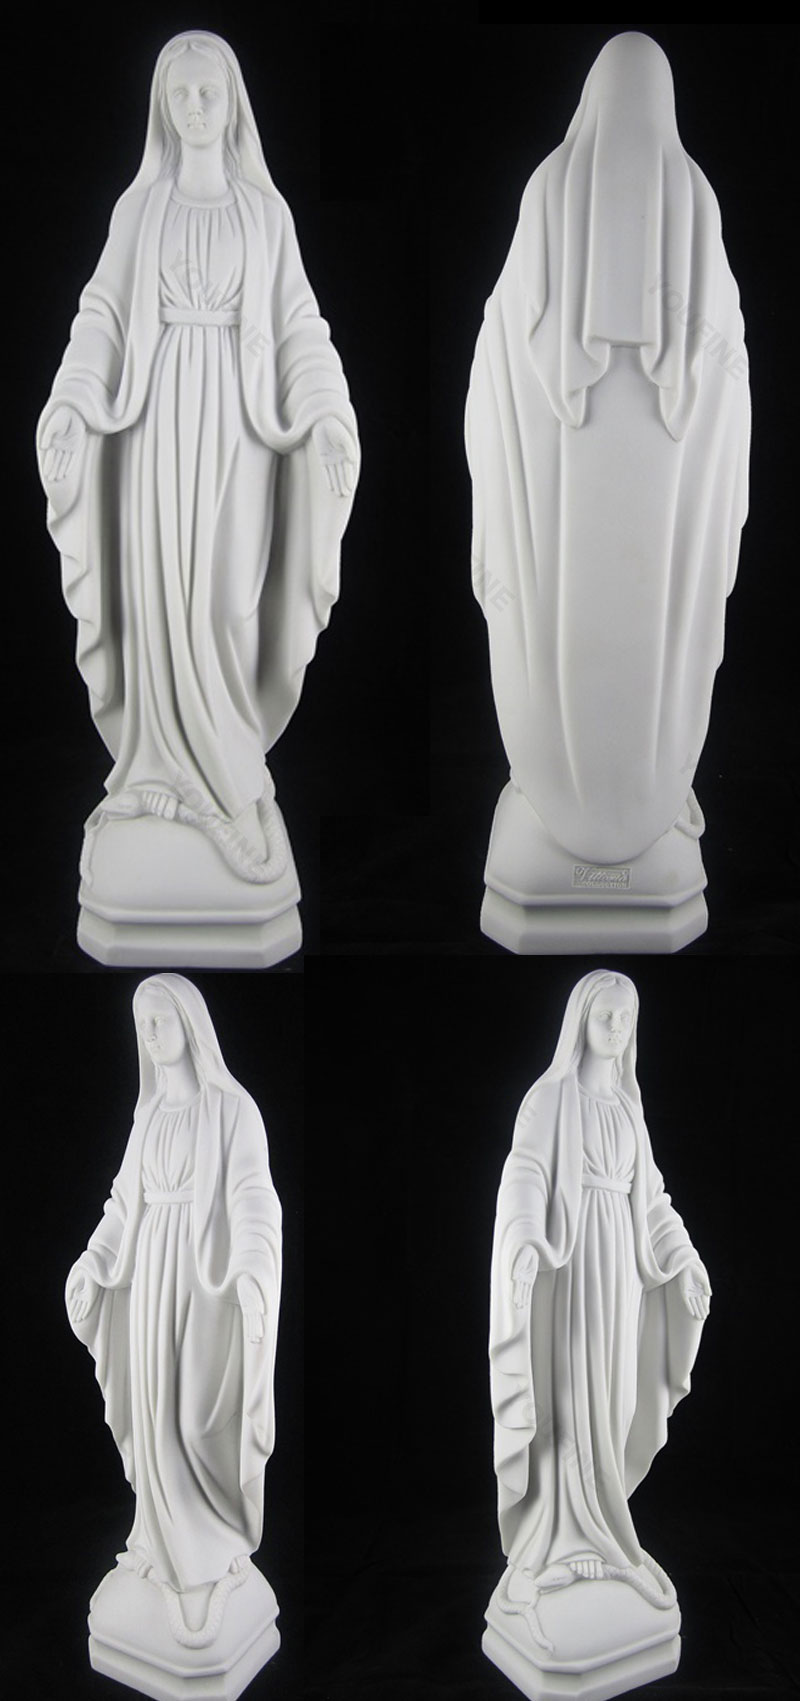 Buy Cathilic statues of our lady grace in stock designs